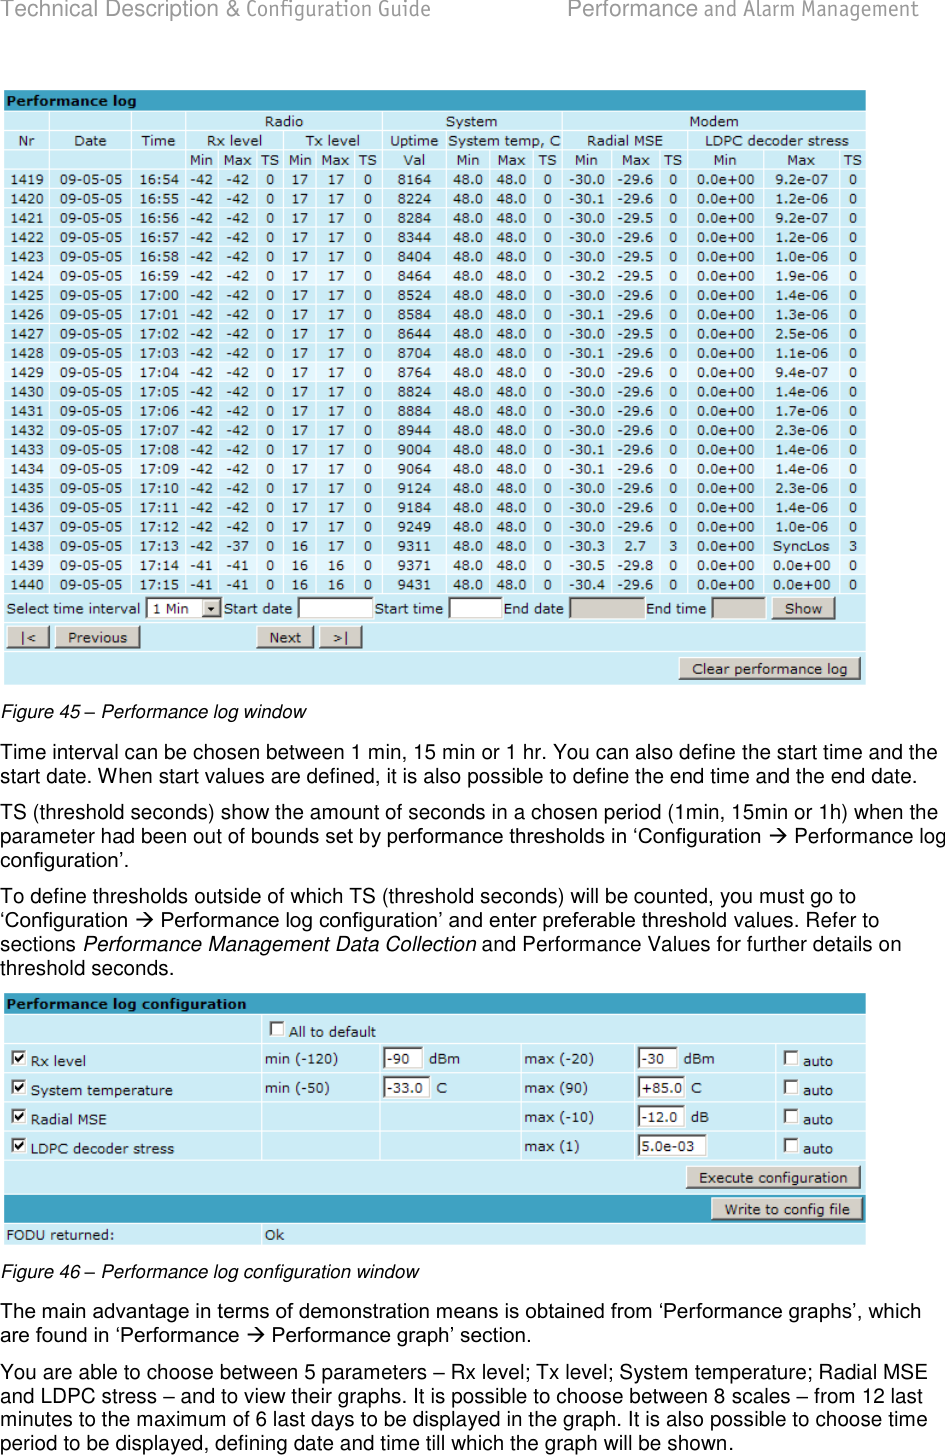 Technical Description &amp; Configuration Guide  Performance and Alarm Management  LigoWave  Page 67  Figure 45 – Performance log window Time interval can be chosen between 1 min, 15 min or 1 hr. You can also define the start time and the start date. When start values are defined, it is also possible to define the end time and the end date. TS (threshold seconds) show the amount of seconds in a chosen period (1min, 15min or 1h) when the parameter had been out of bound Performance log  To define thresholds outside of which TS (threshold seconds) will be counted, you must go to  values. Refer to sections Performance Management Data Collection and Performance Values for further details on threshold seconds.   Figure 46 – Performance log configuration window   You are able to choose between 5 parameters  Rx level; Tx level; System temperature; Radial MSE and LDPC stress  and to view their graphs. It is possible to choose between 8 scales  from 12 last minutes to the maximum of 6 last days to be displayed in the graph. It is also possible to choose time period to be displayed, defining date and time till which the graph will be shown. 